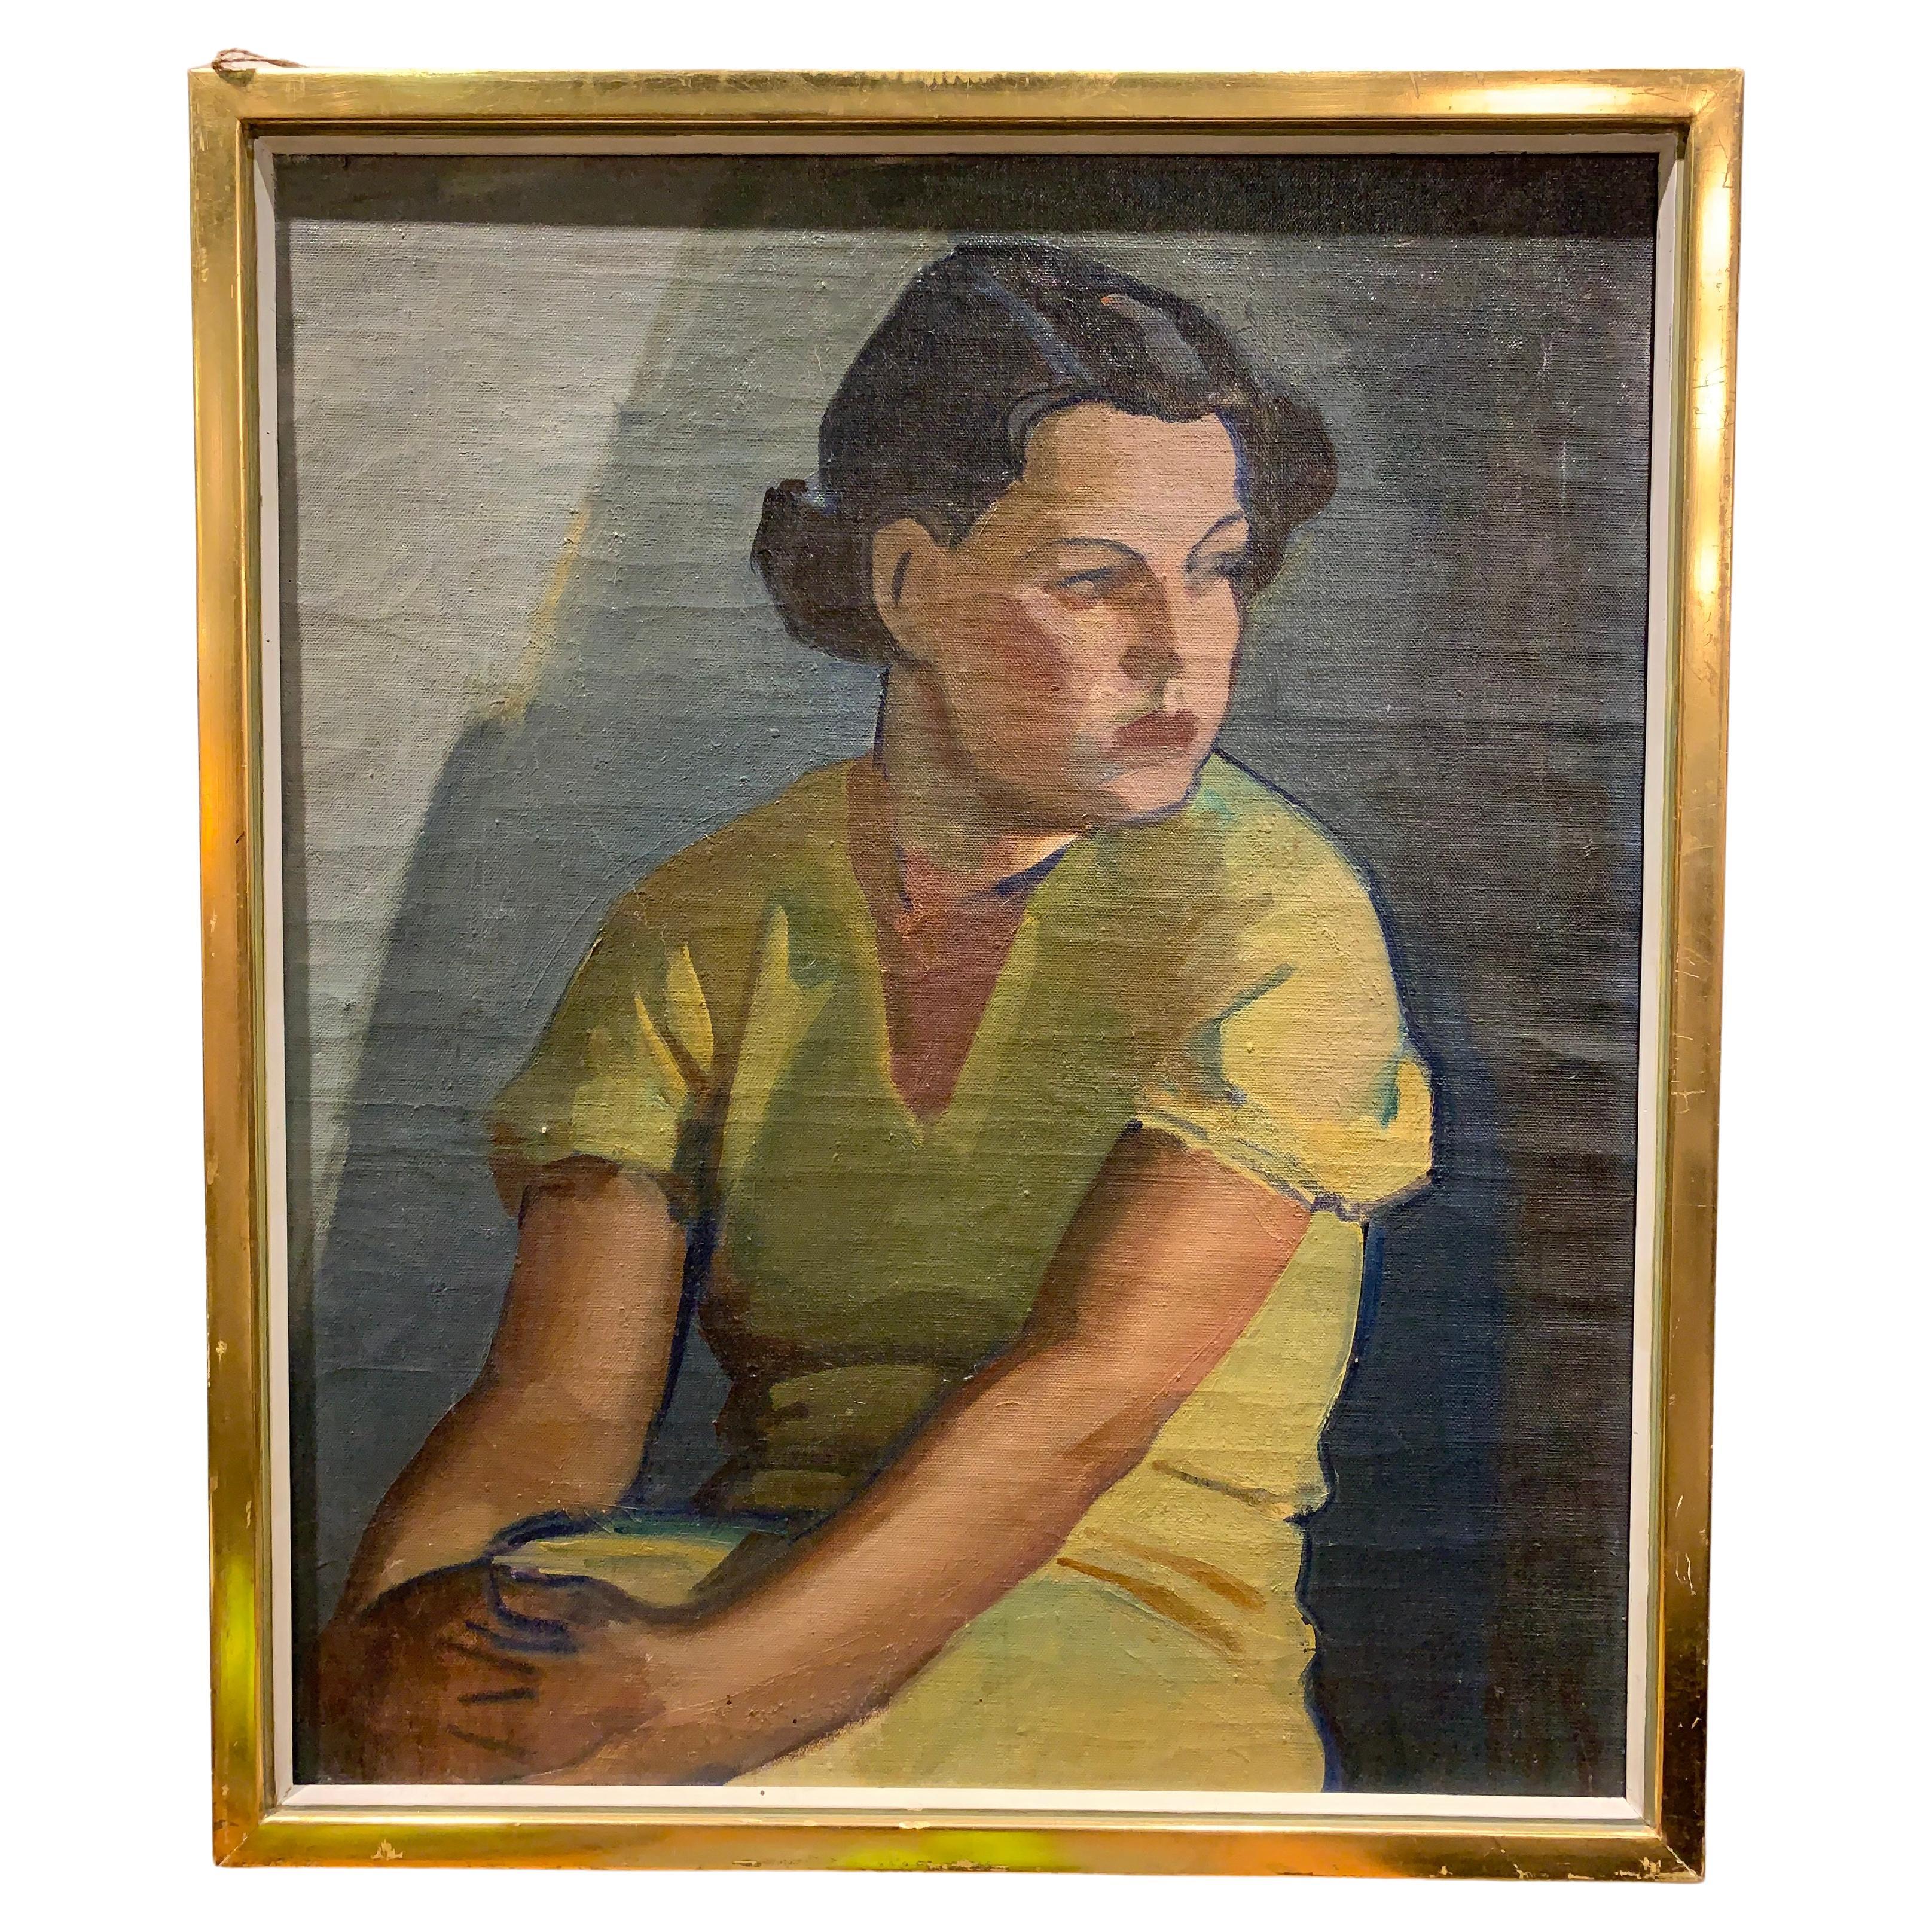 1930s Finnish 'Young Woman in a Yellow Dress' Oil on Canvas Artist Llmari Aalto For Sale